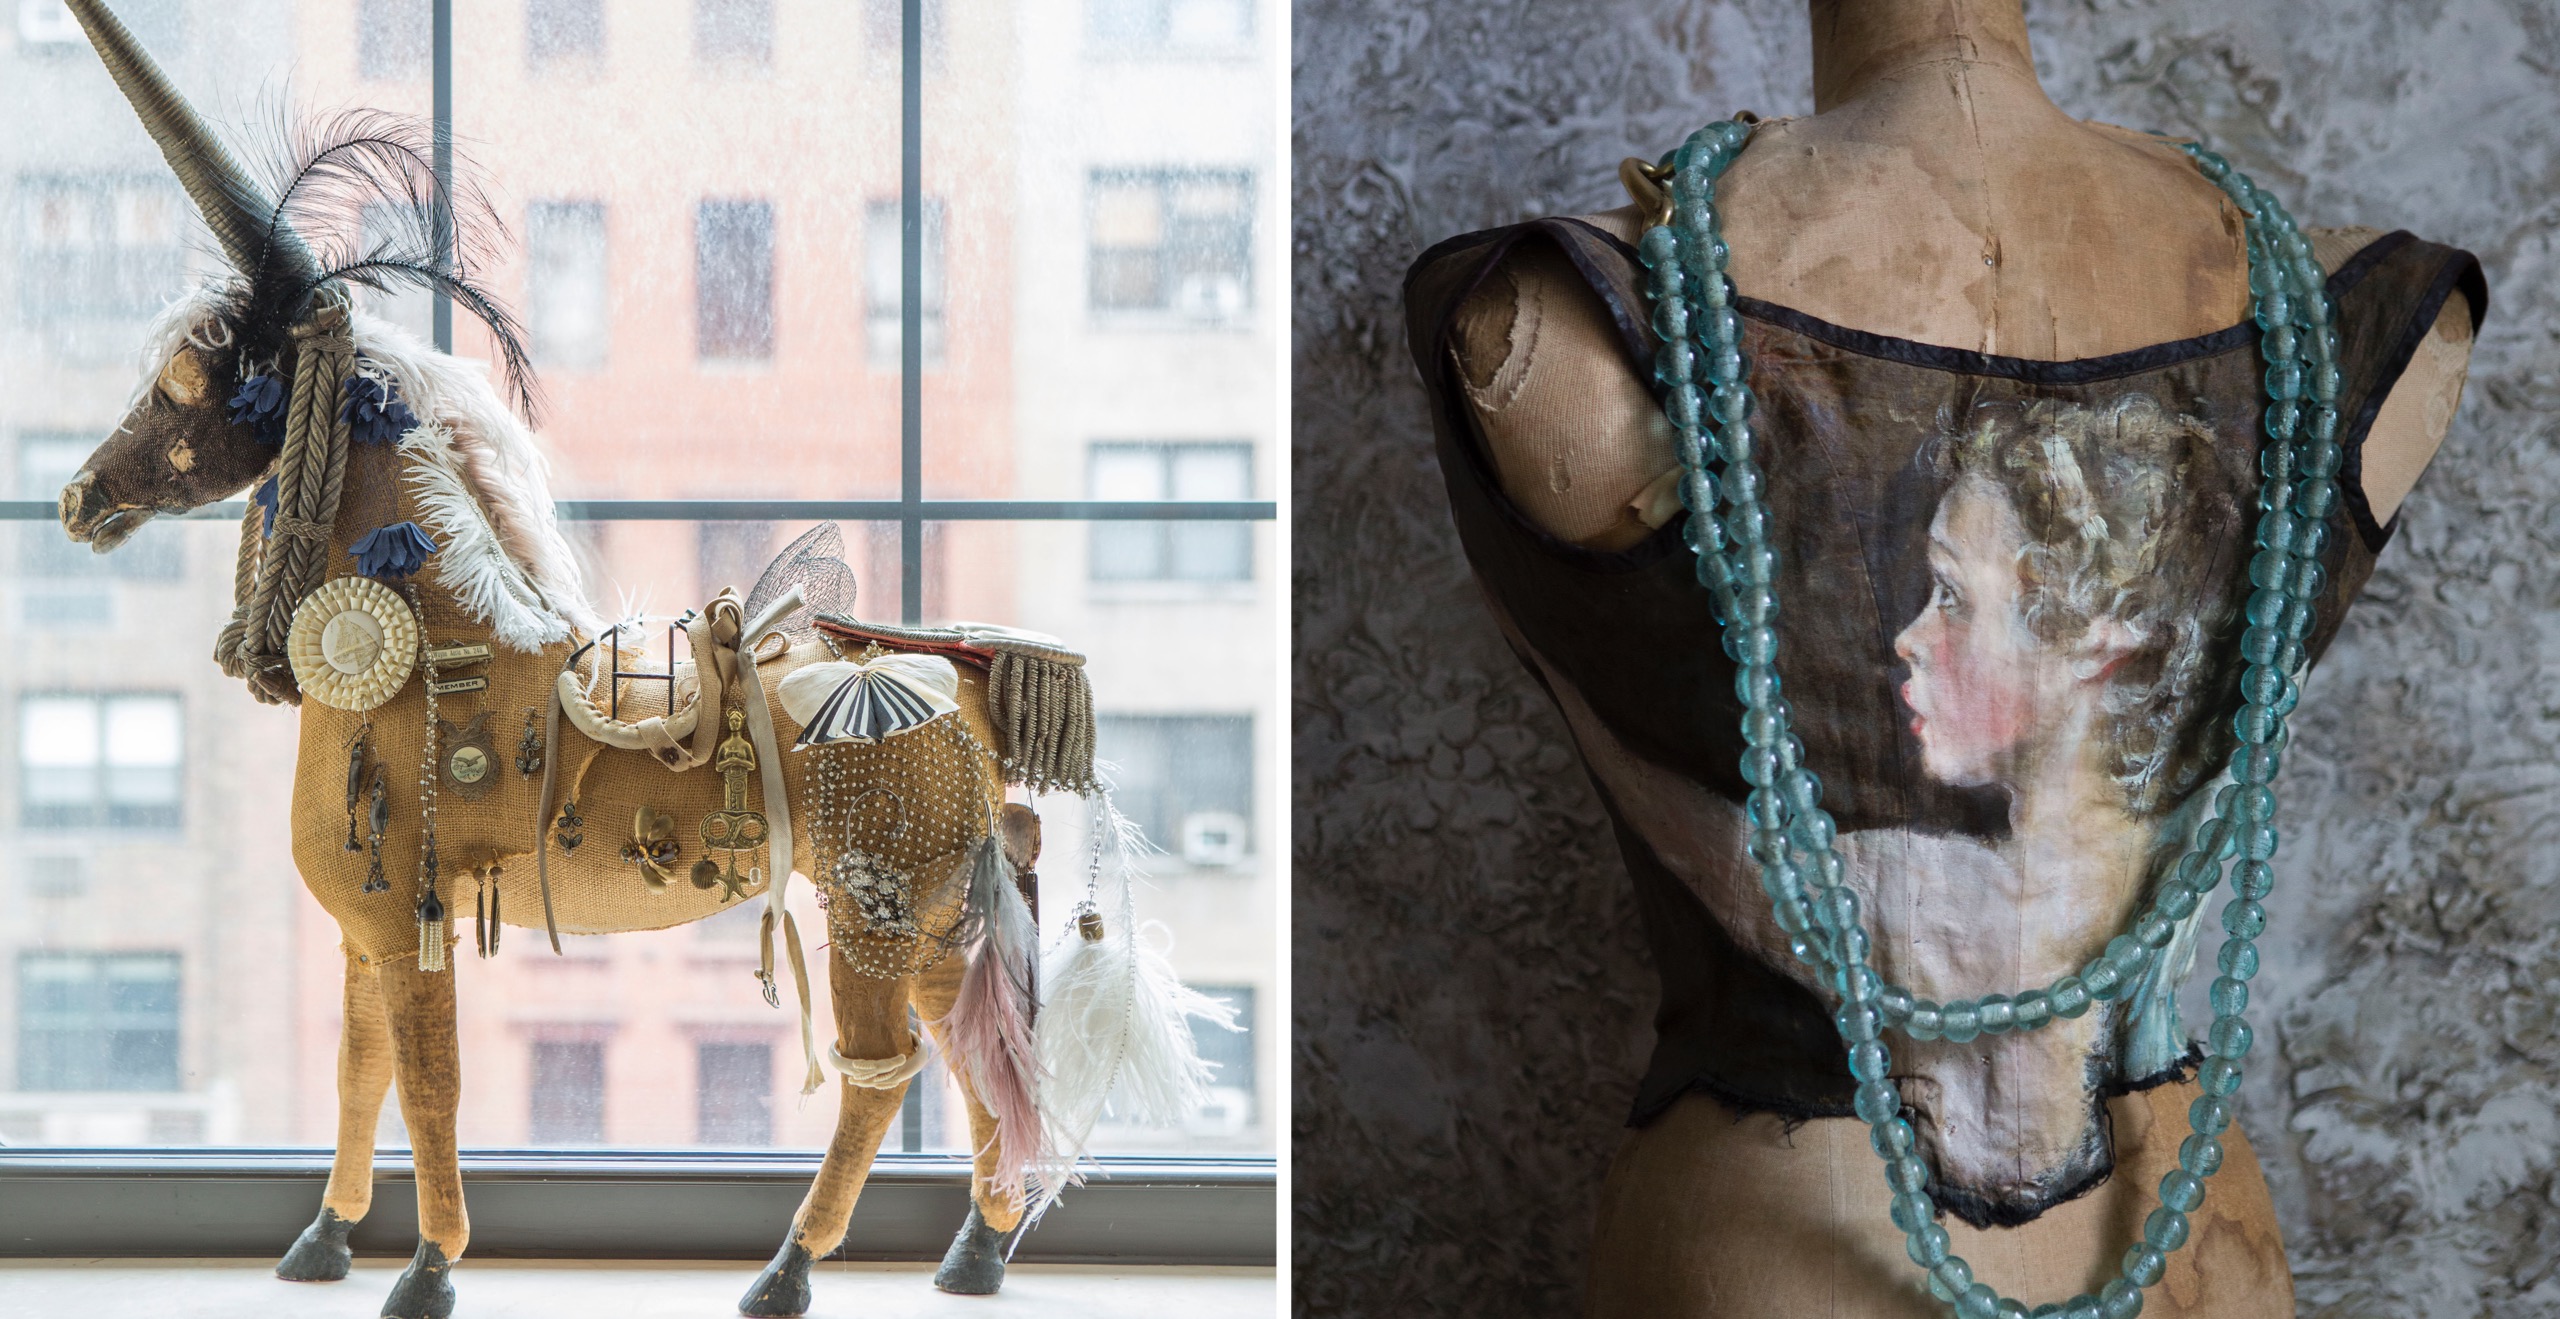 Left to right: Collector and artist Daniela Kamiliotis rescued this tattered horse at a flea market and transformed him into a magical unicorn encrusted with some of her fabulous finds. His tail is a vintage epaulet!; A romantic portrait of a girl by Daniela on a vintage garment adorns an antique dress form framed with sea glass beads